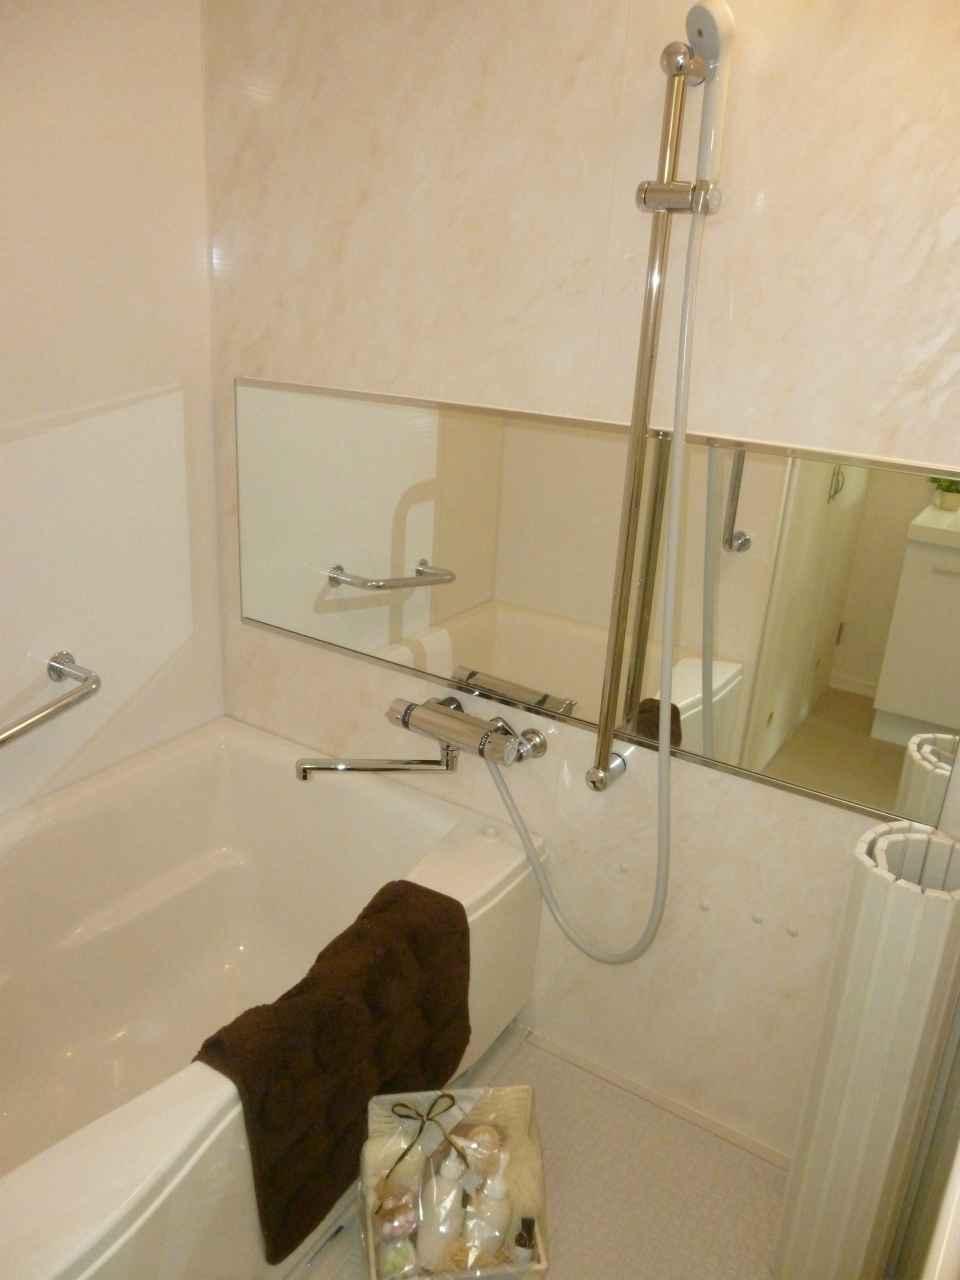 Bathroom. Bathroom is Yes to set exchange. It is very convenient and is easy-to-use shower large mirror.